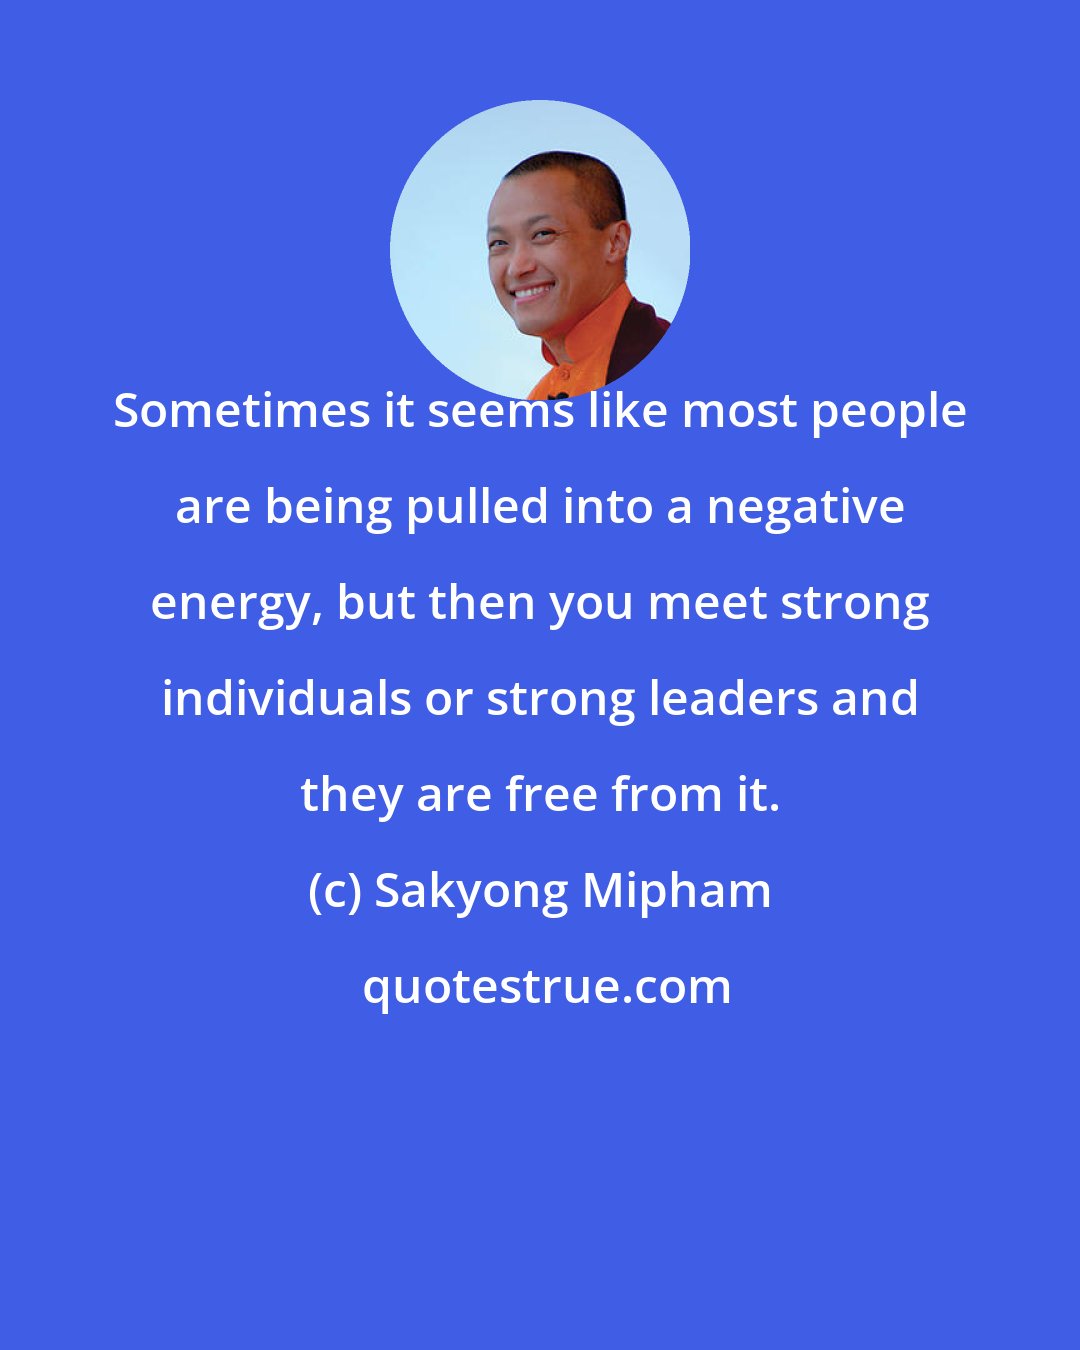 Sakyong Mipham: Sometimes it seems like most people are being pulled into a negative energy, but then you meet strong individuals or strong leaders and they are free from it.